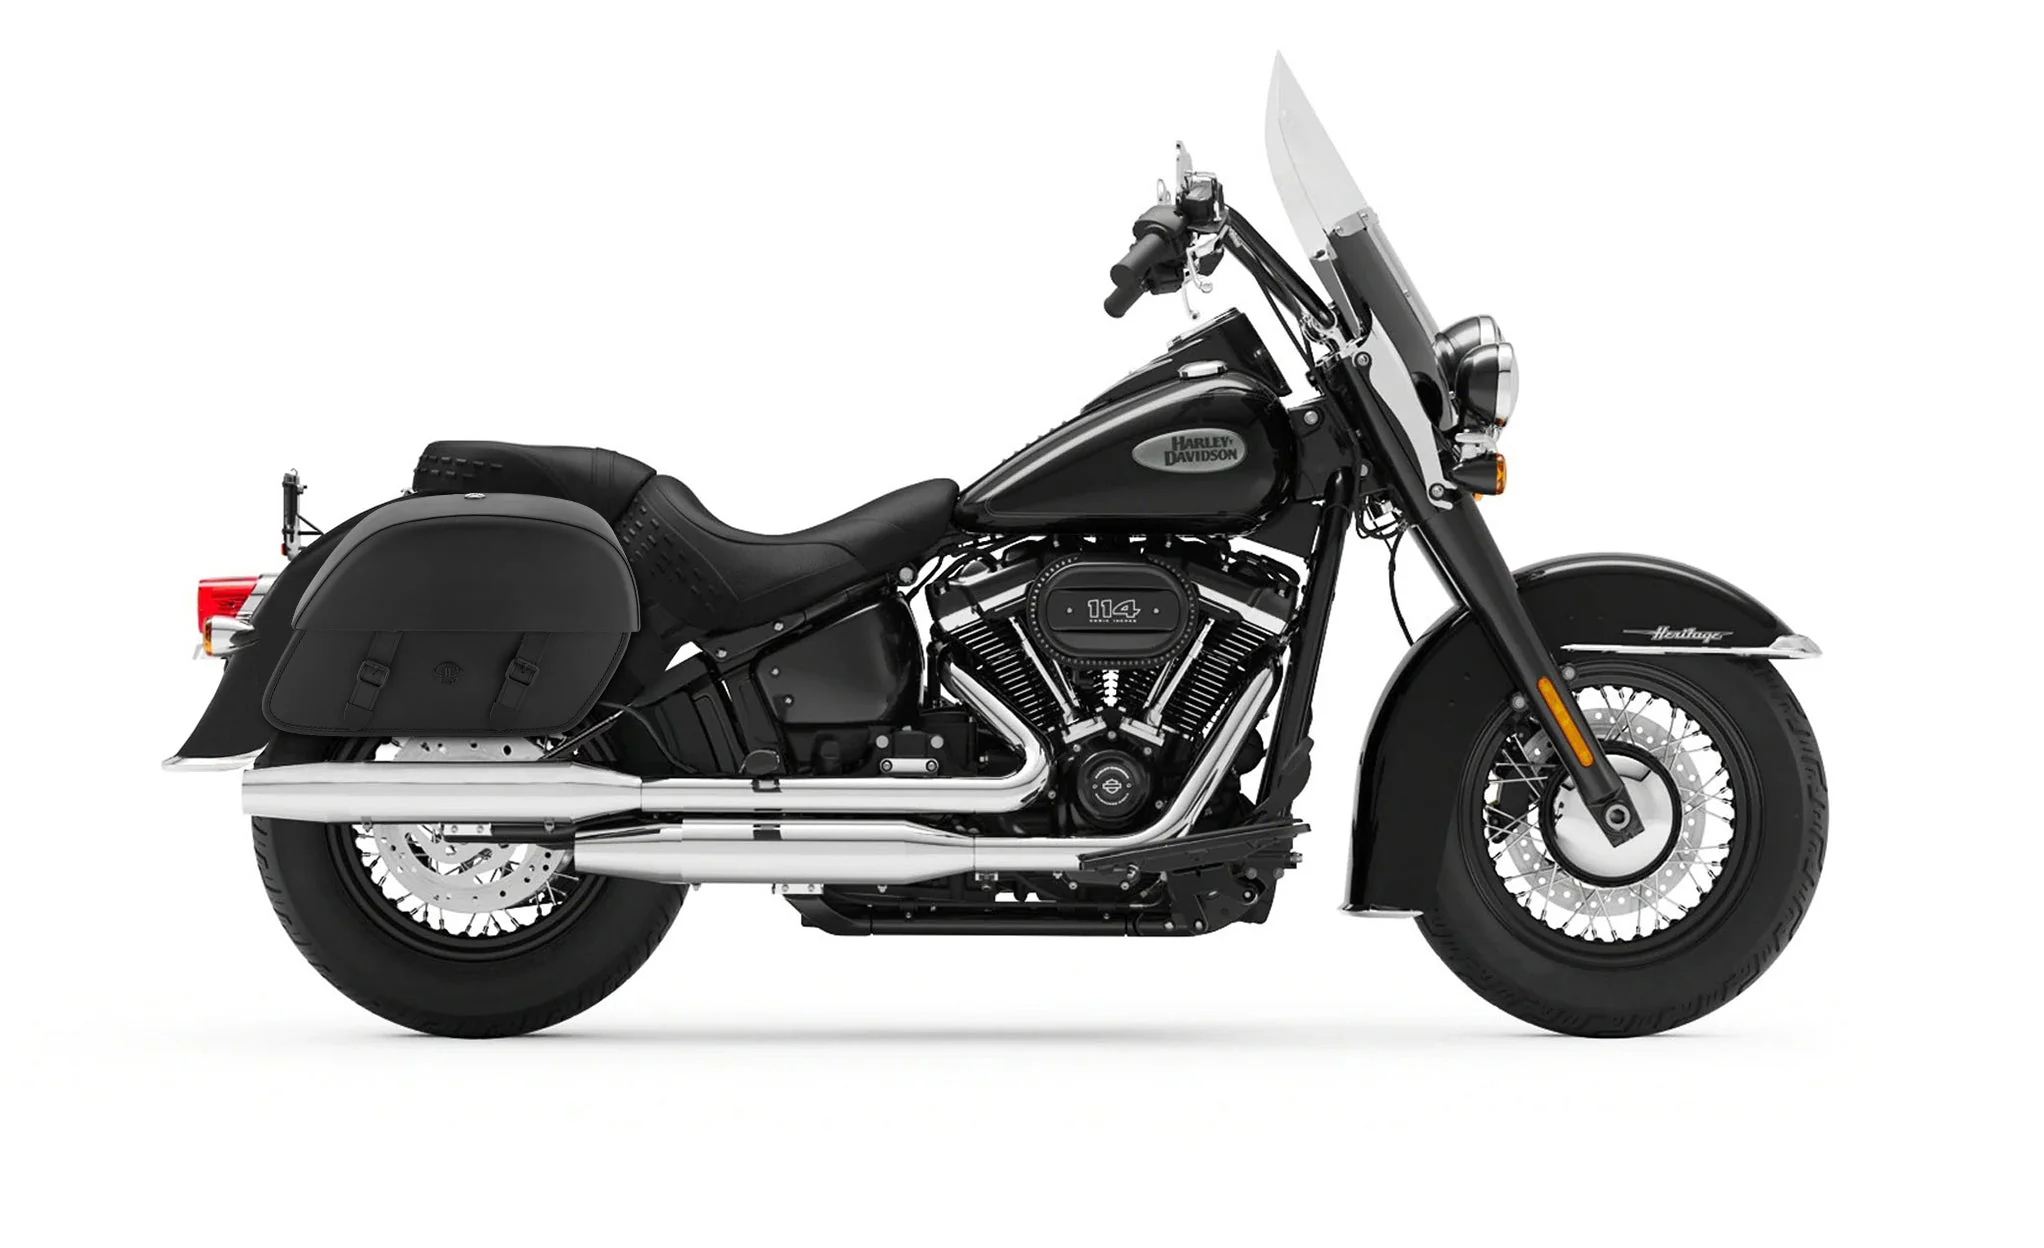 28L - Baelor Medium Quick Mount Motorcycle Saddlebags For Harley Softail Heritage FLHC/S @expand